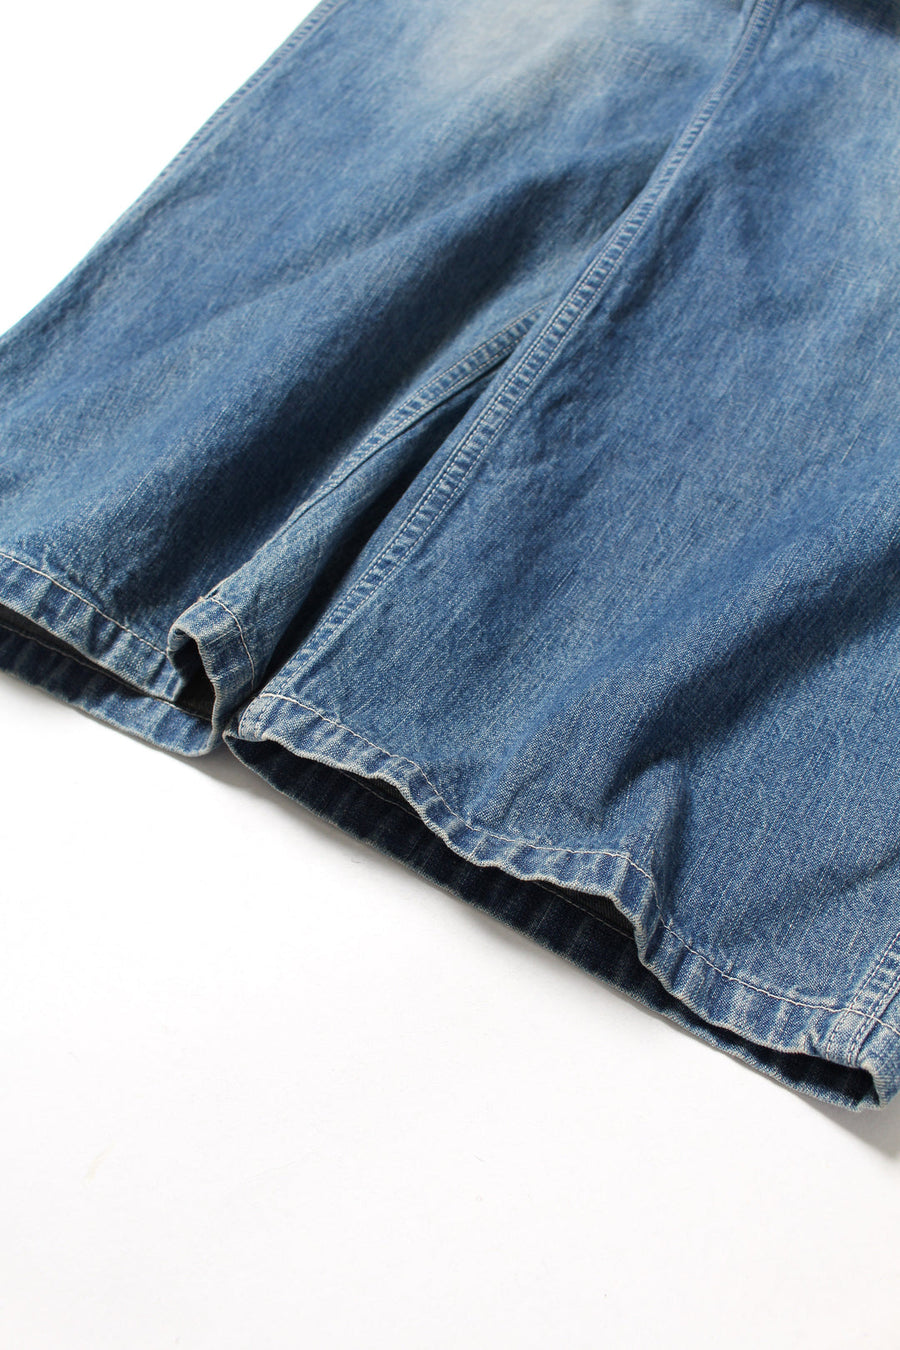 〈BOW WOW〉US ARMY M35 DENIM TROUSERS